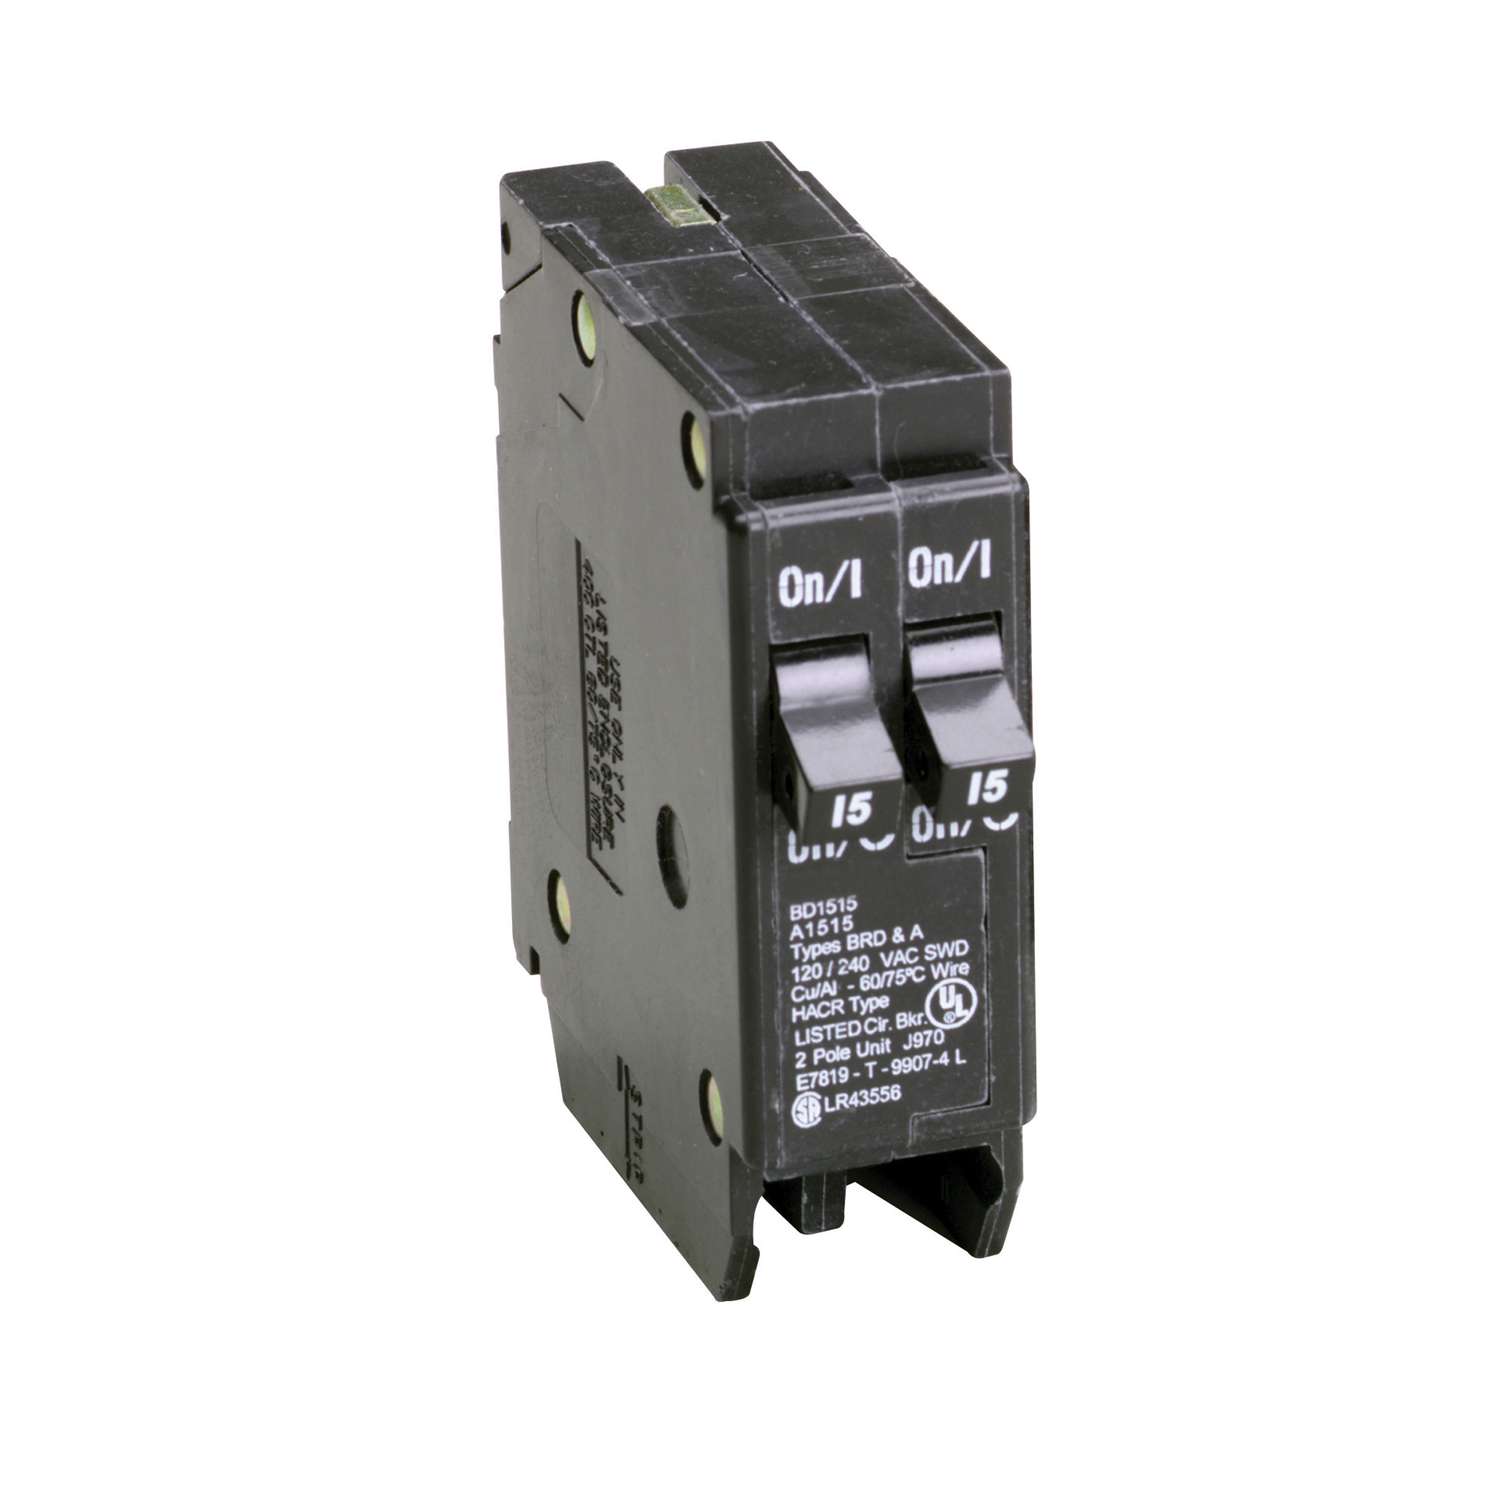 Details about   G&E 15 Amp Circuit Breaker Cat # TED 134015 USED 